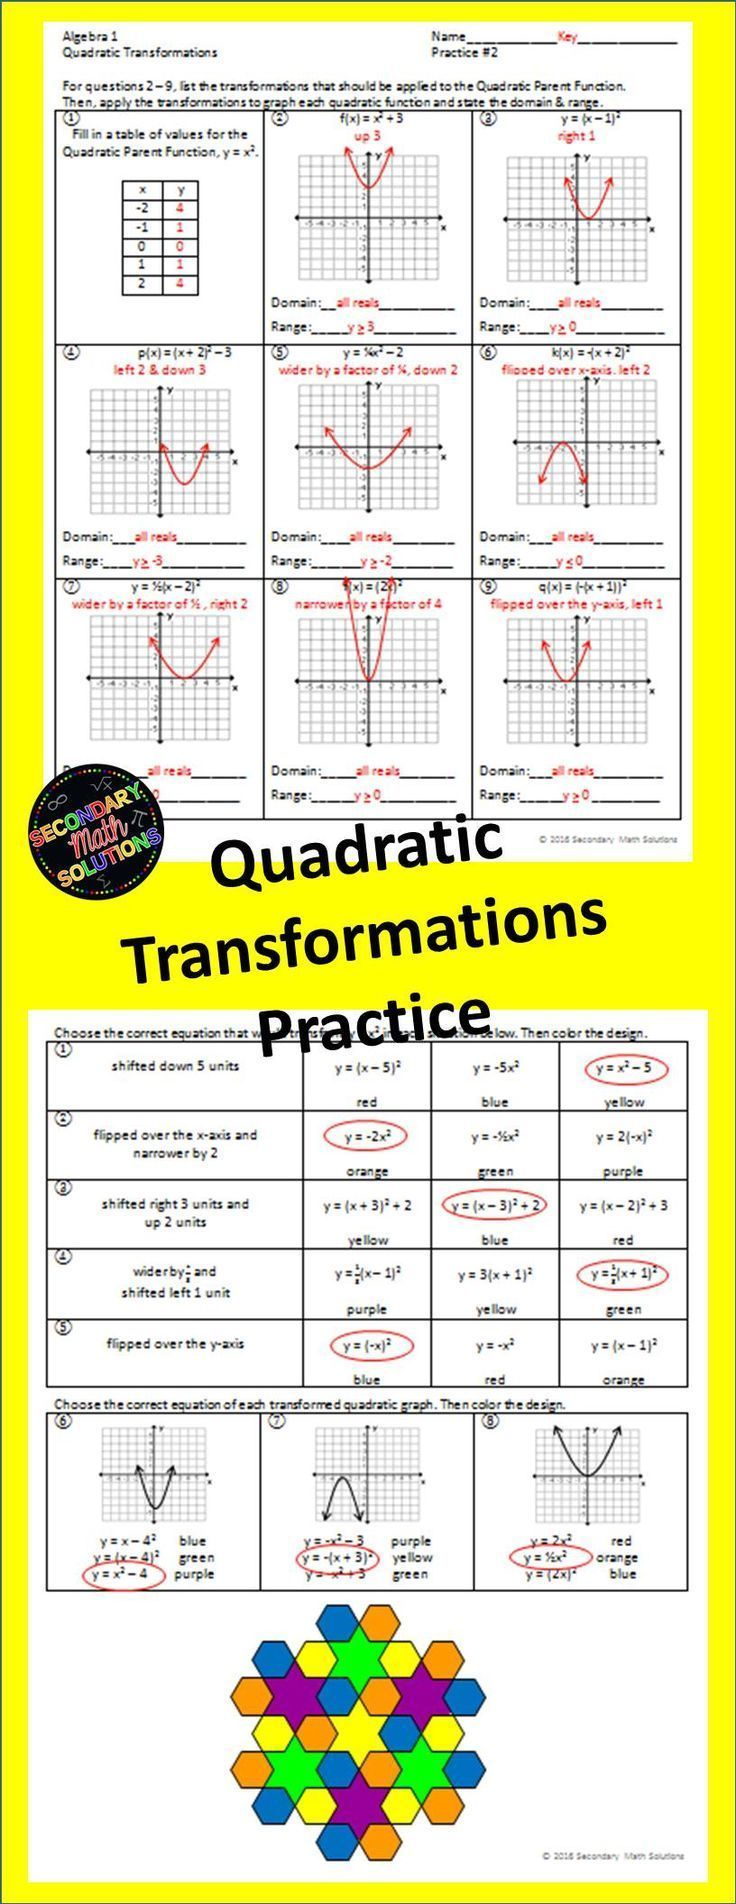 Quadratic Transformations Worksheet Answers Rpdp Answer Key Schematic